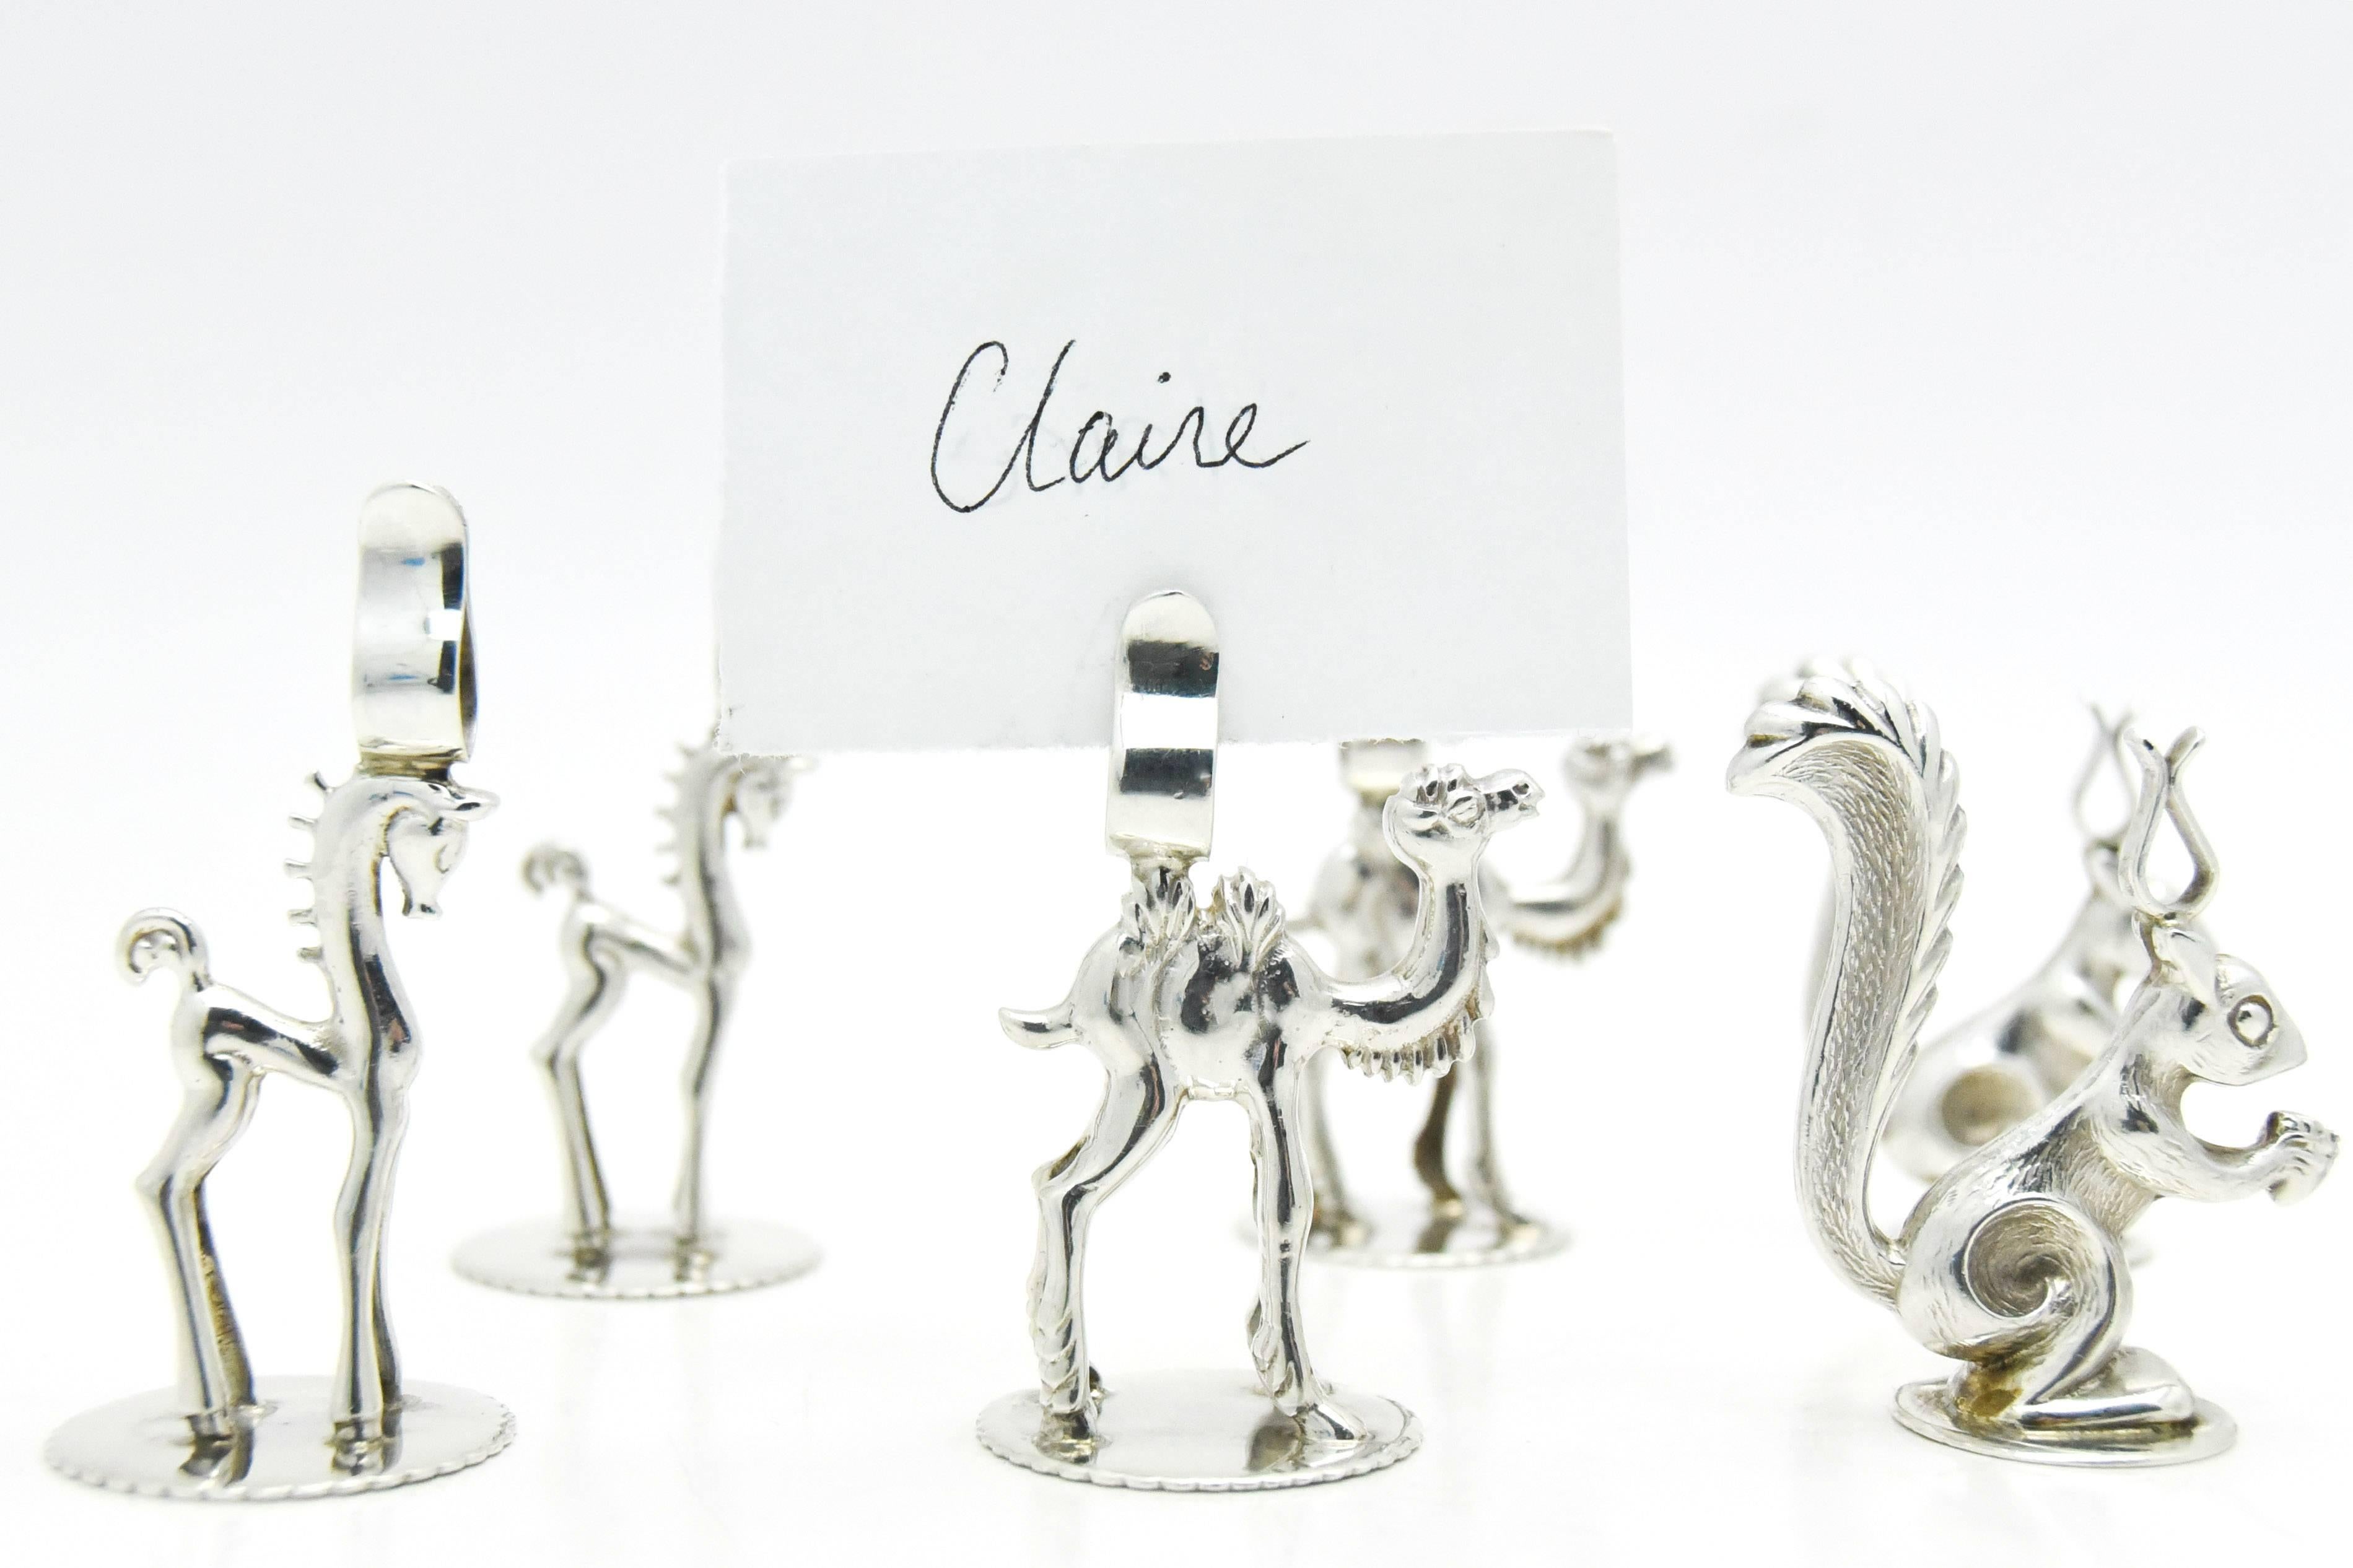 These are sure to put a smile on your face! This set of 12 whimsical sterling silver place card holders are created in the Art Deco style and of the period. Featuring a broad range of animals across the kingdom; elephants, monkeys, squirrels, camels